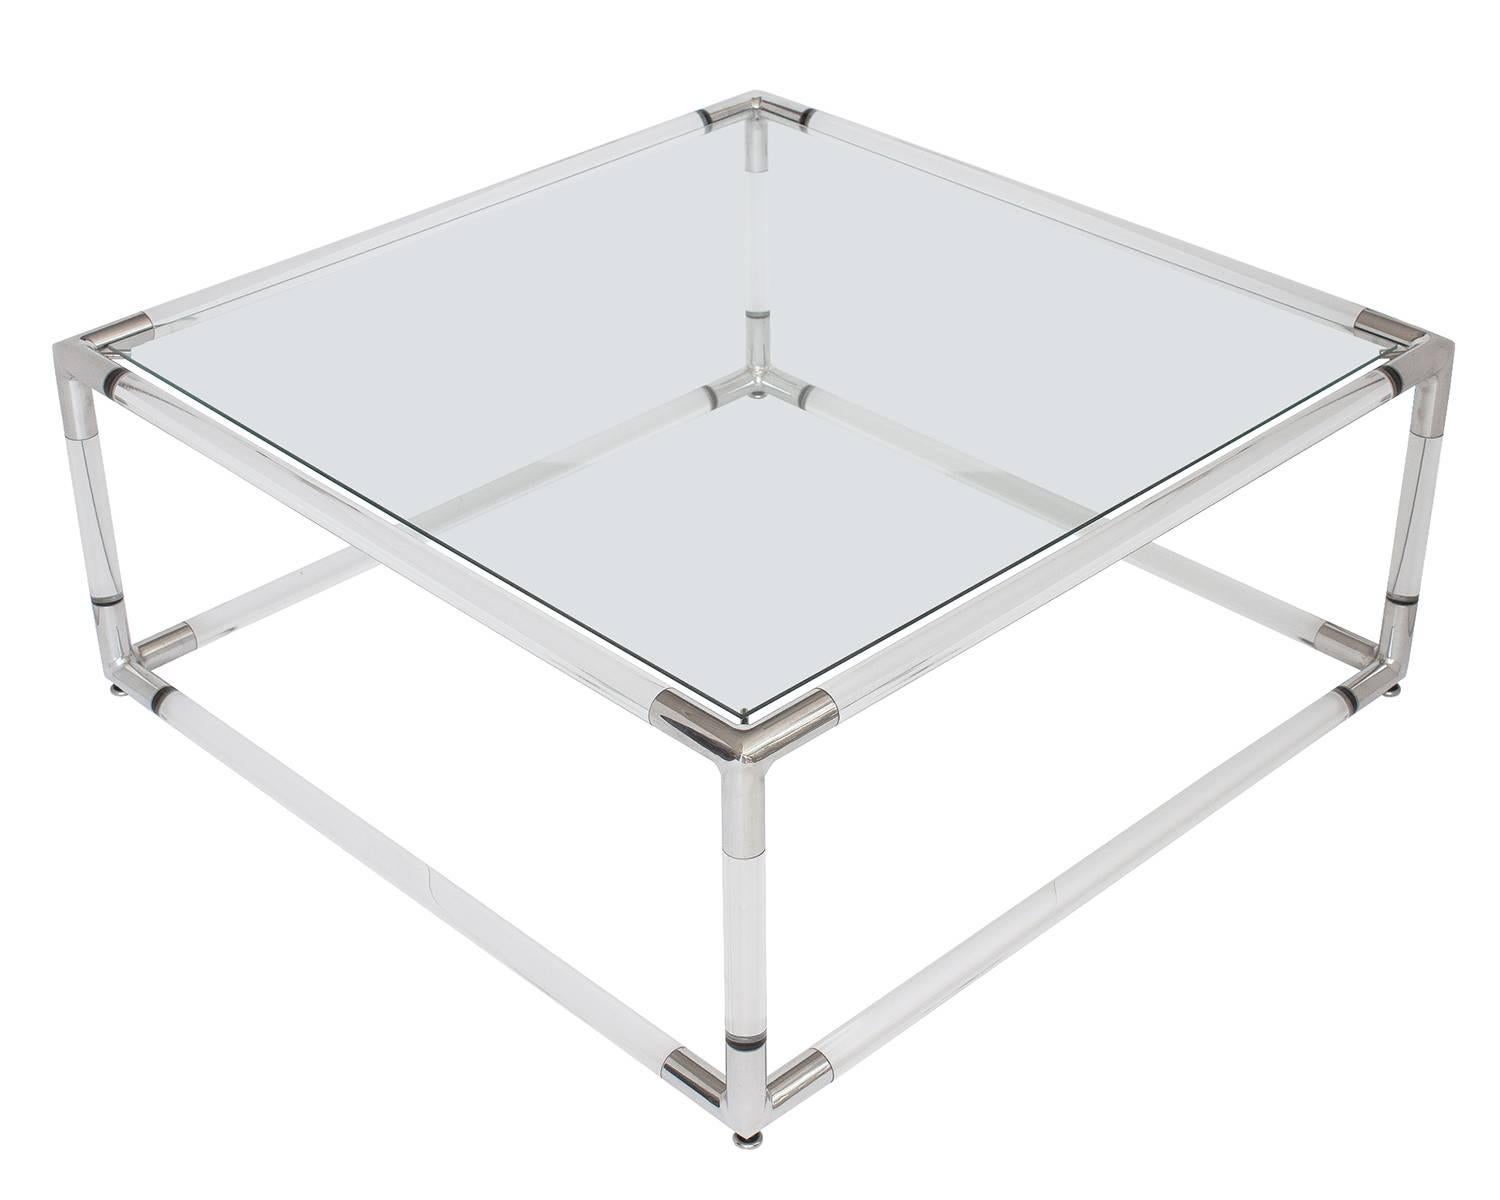 Mid-20th Century Lucite and Aluminium Square Coffee Table with Glass Top